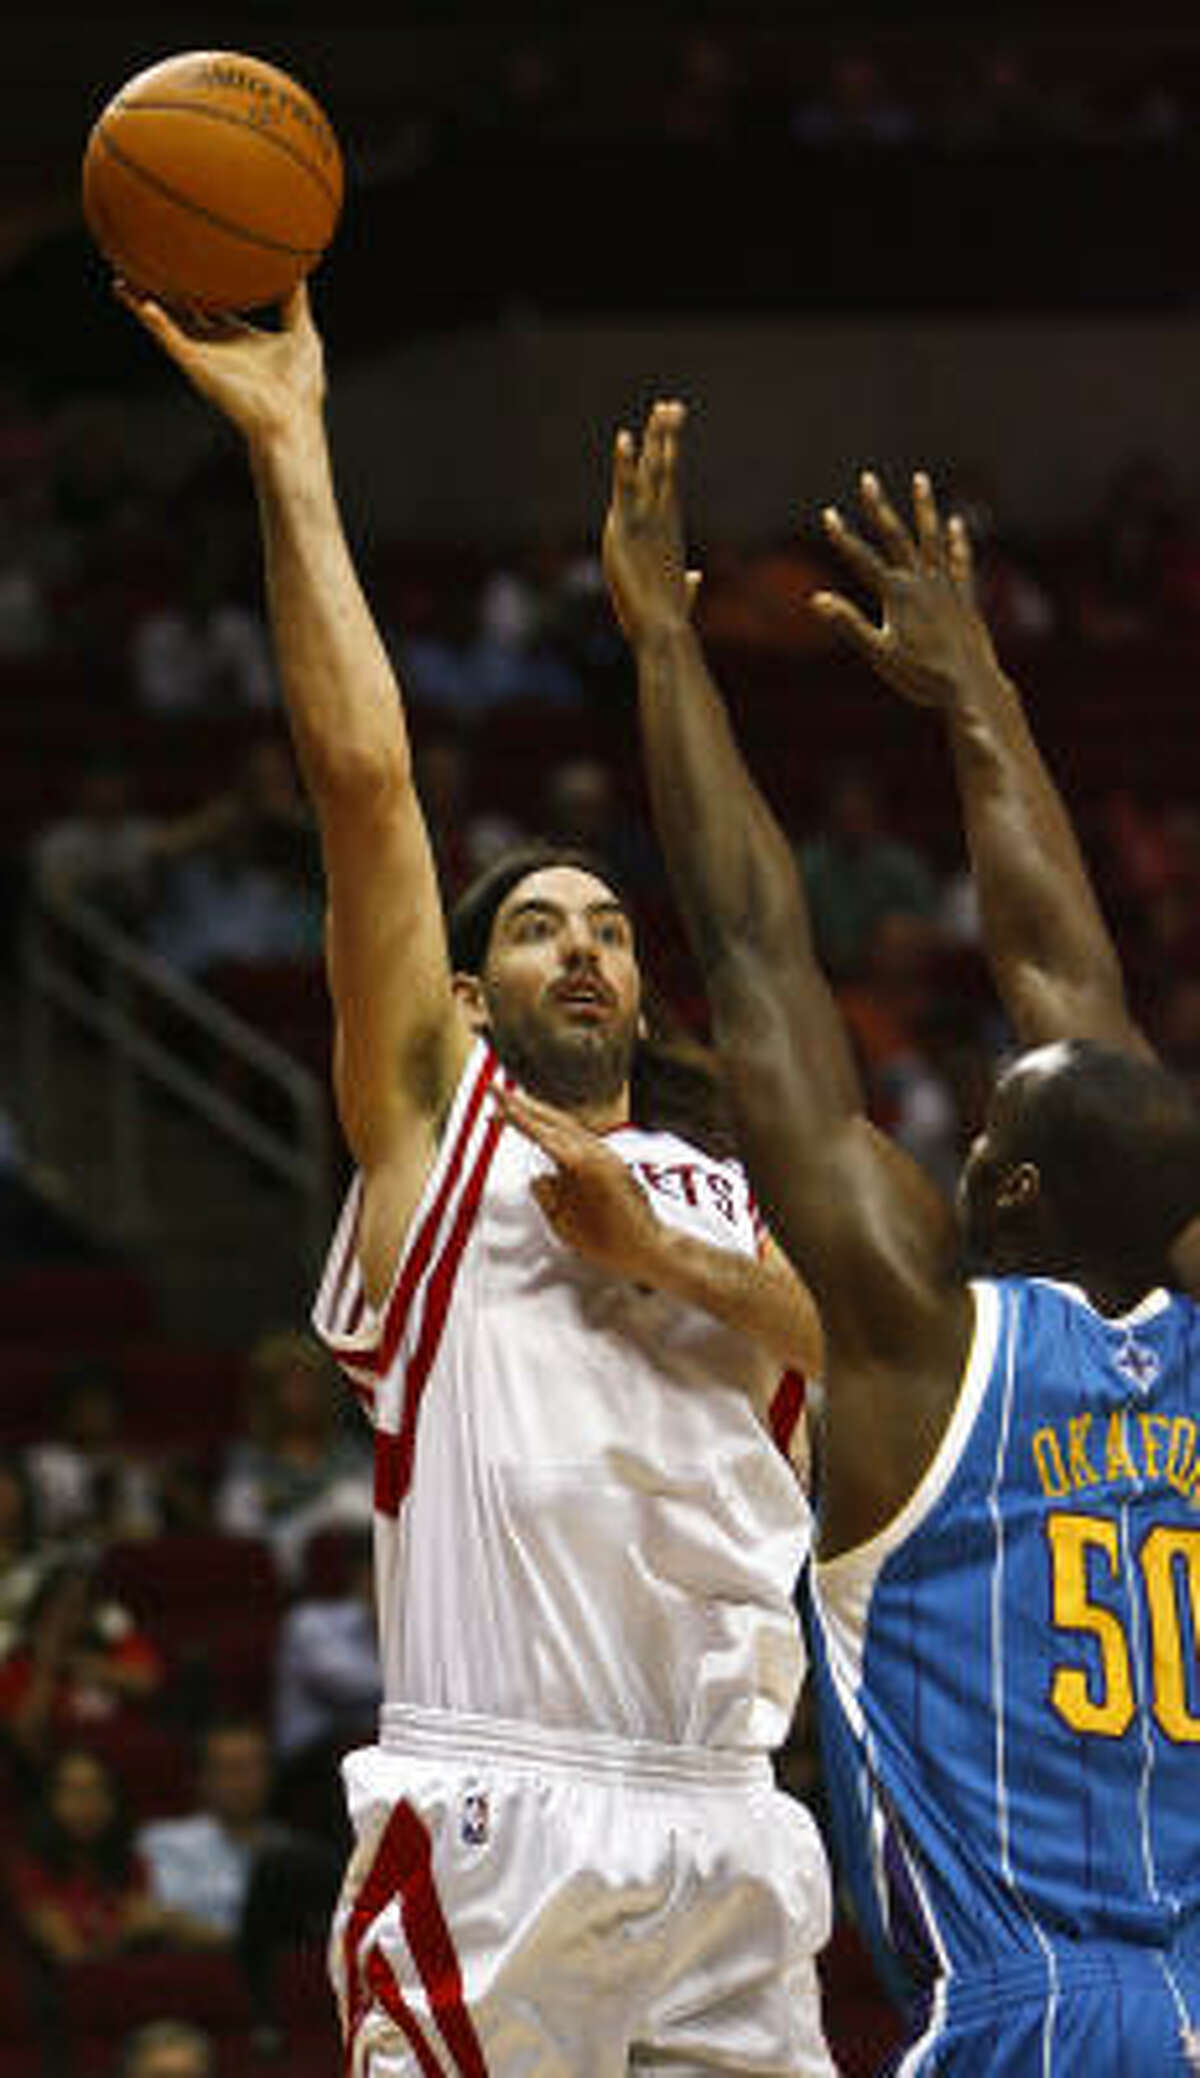 Luis Scola averaged 16.2 points and 8.6 rebounds for the Rockets last season.